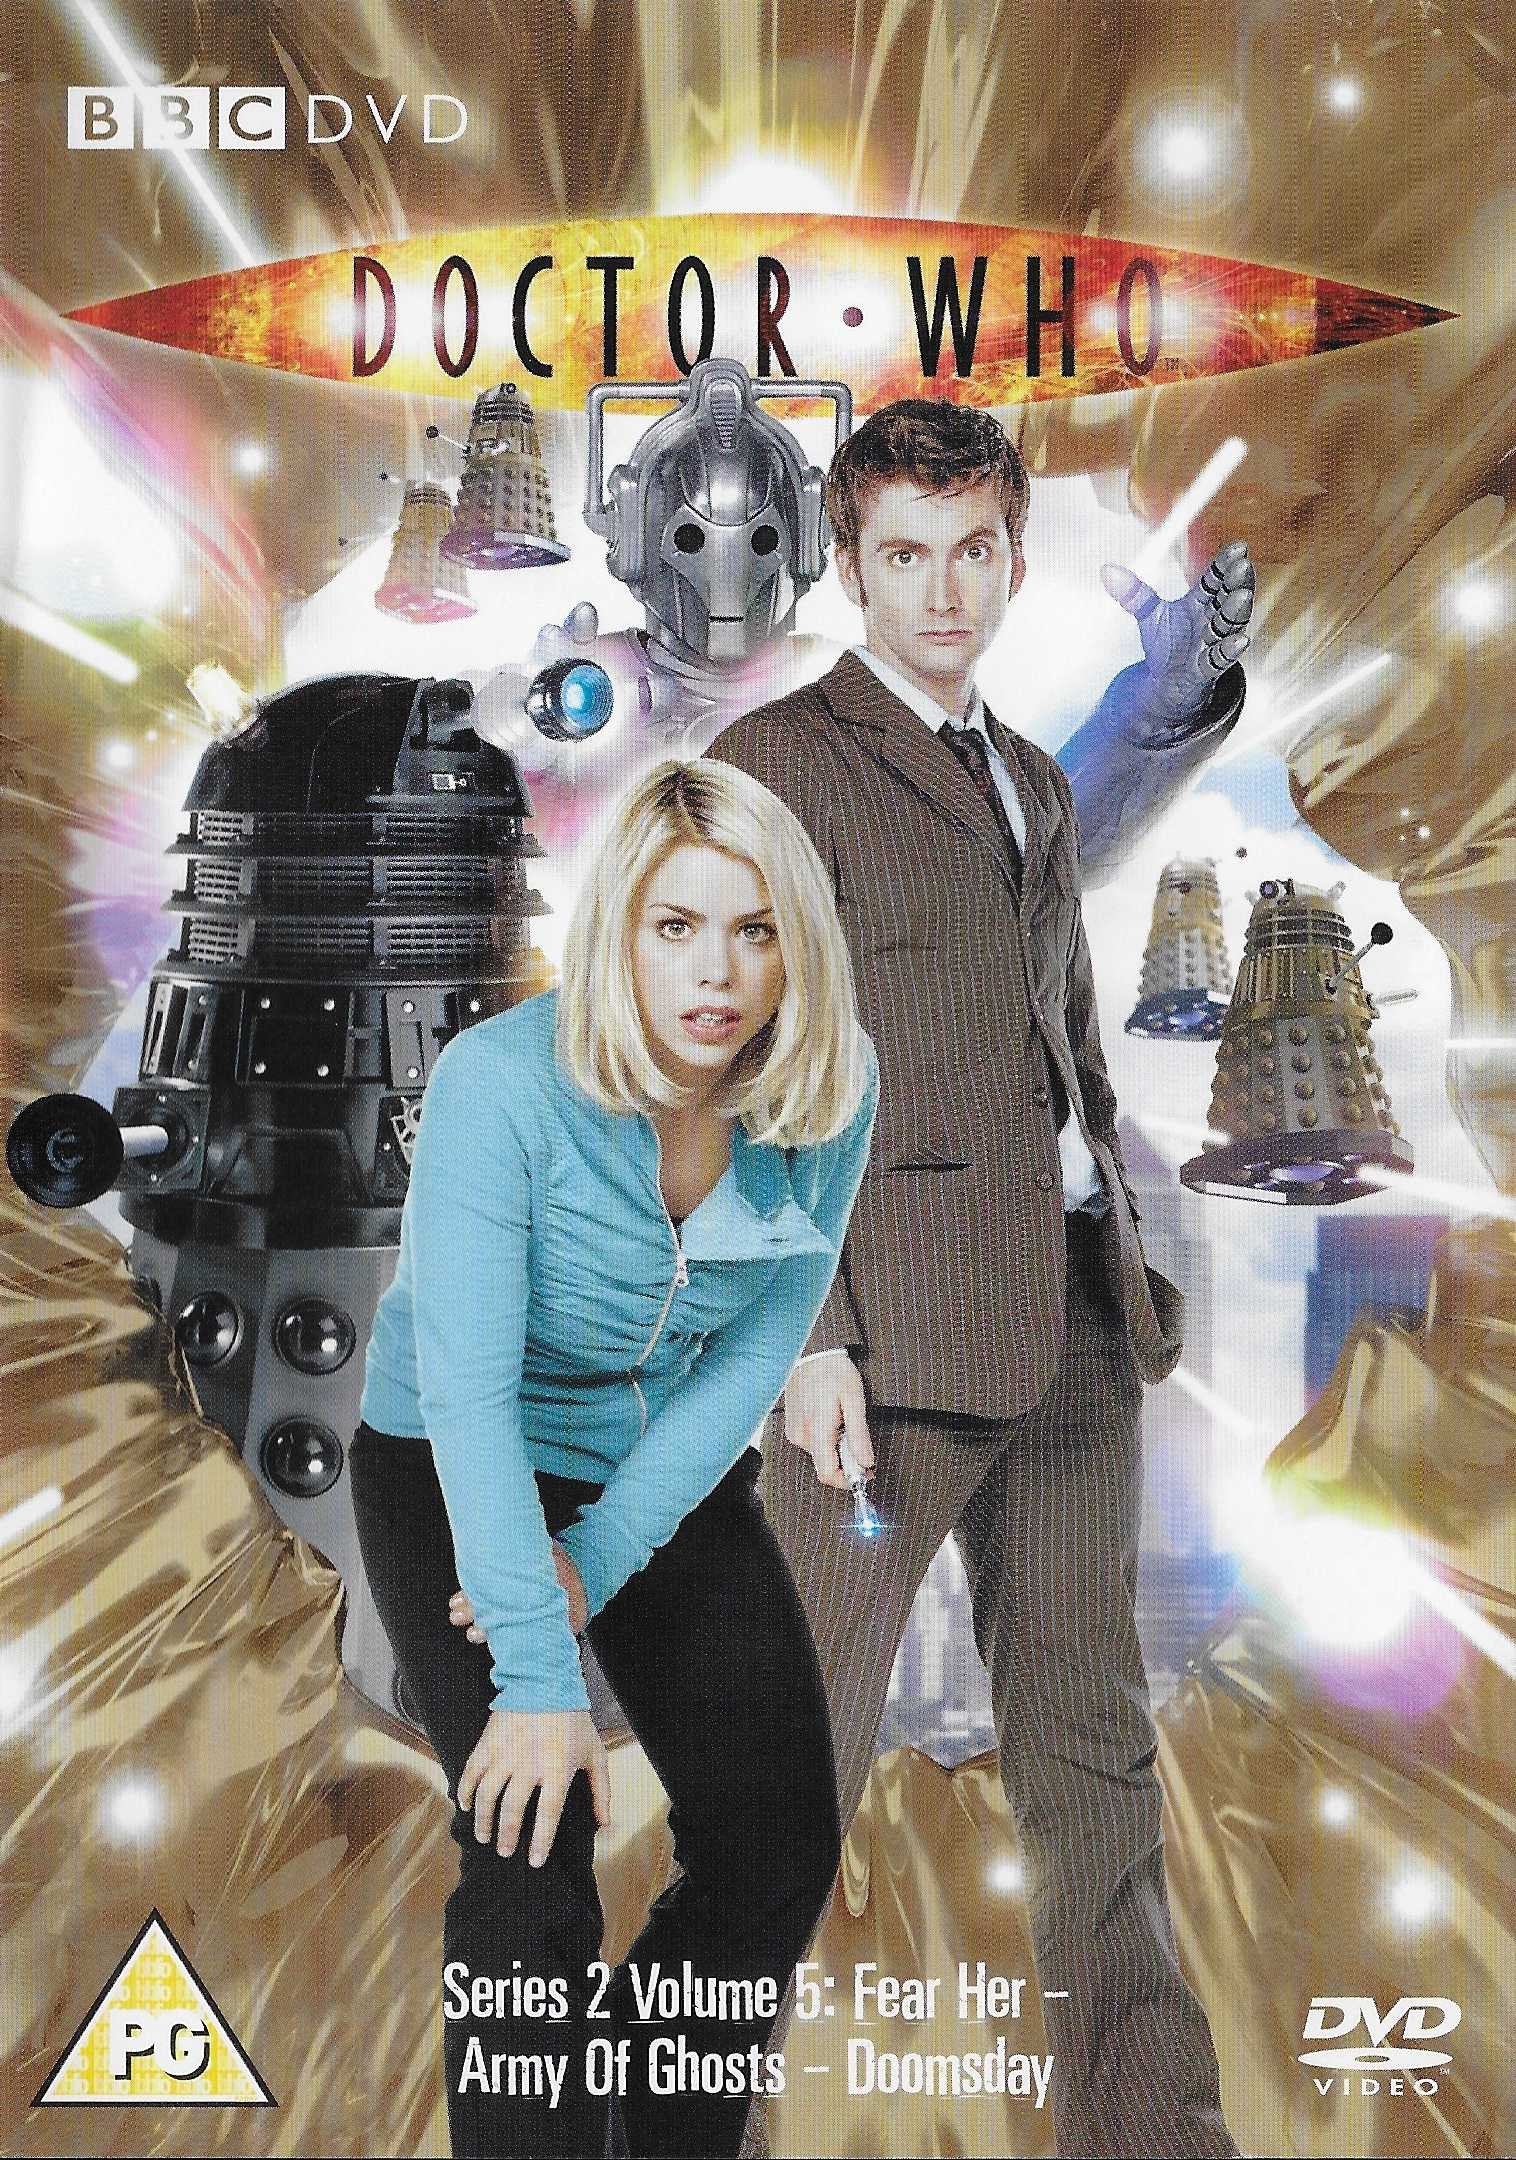 Picture of BBCDVD 1964 Doctor Who - Series 2, volume 5 by artist Matthew Graham / Russell T Davies from the BBC records and Tapes library